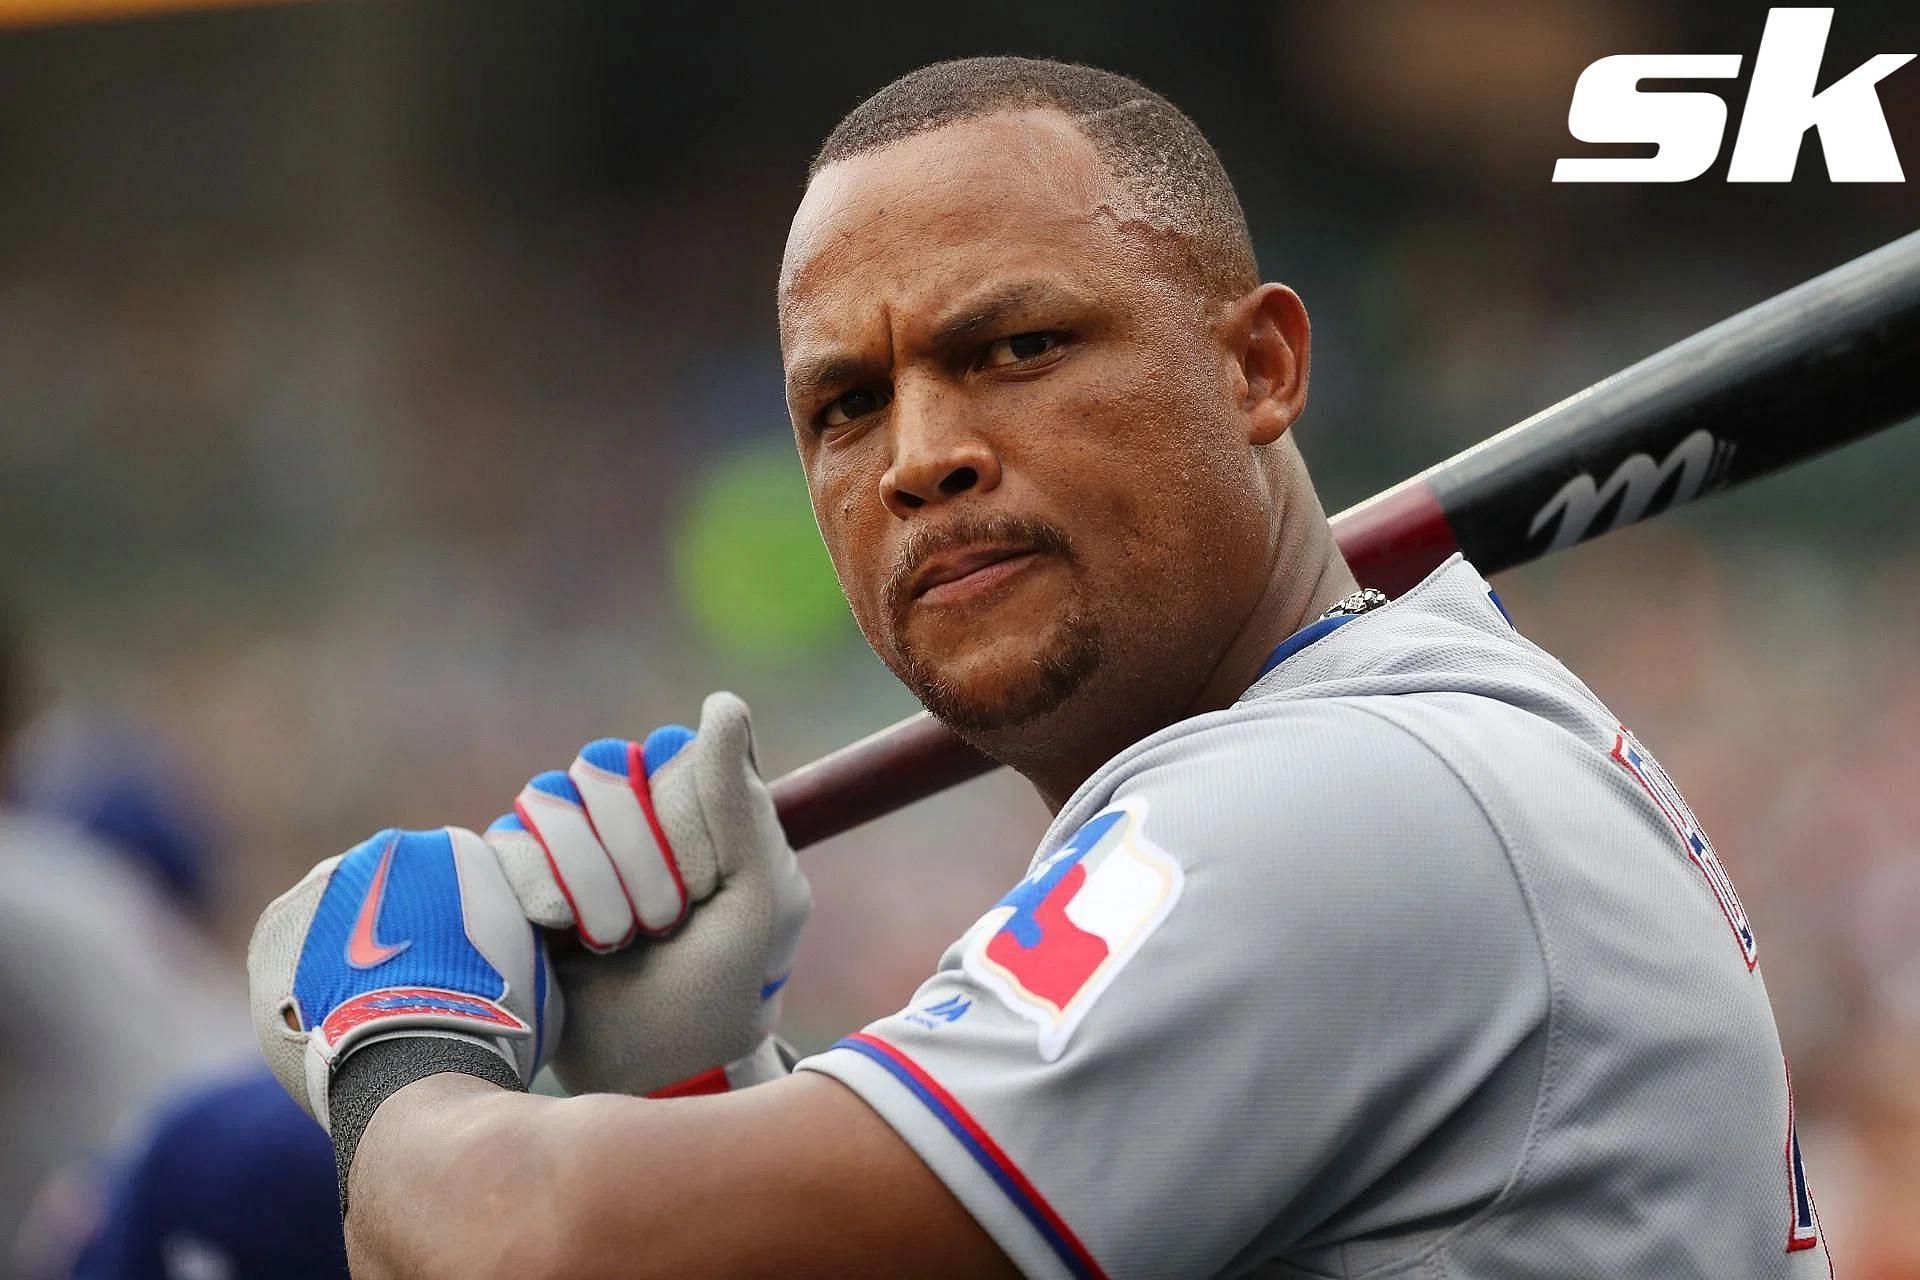 "Adrian Beltre turned a lot better than we thought" Former Rangers GM